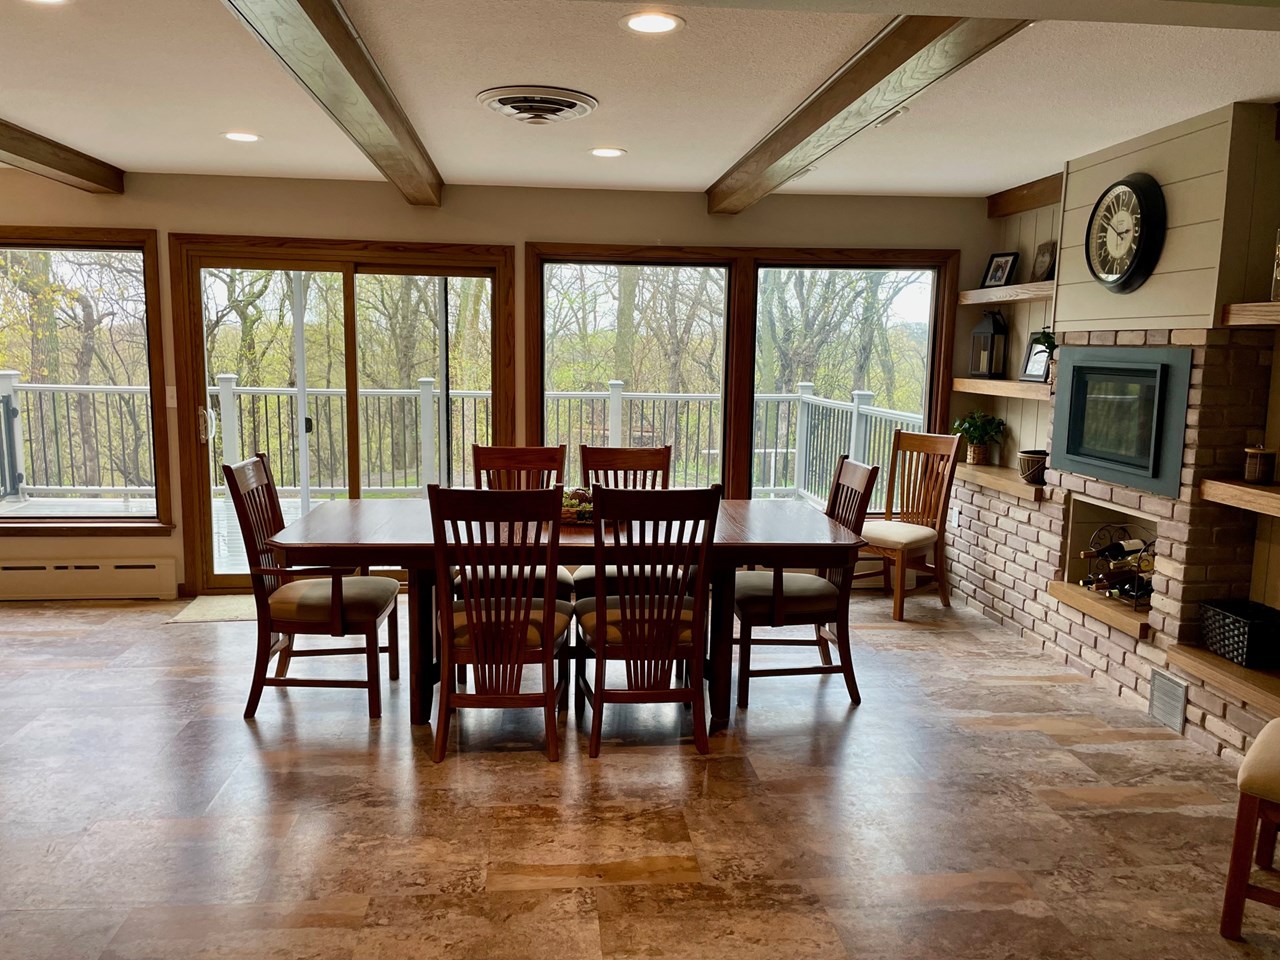 dining area with a great view of backyard and deck